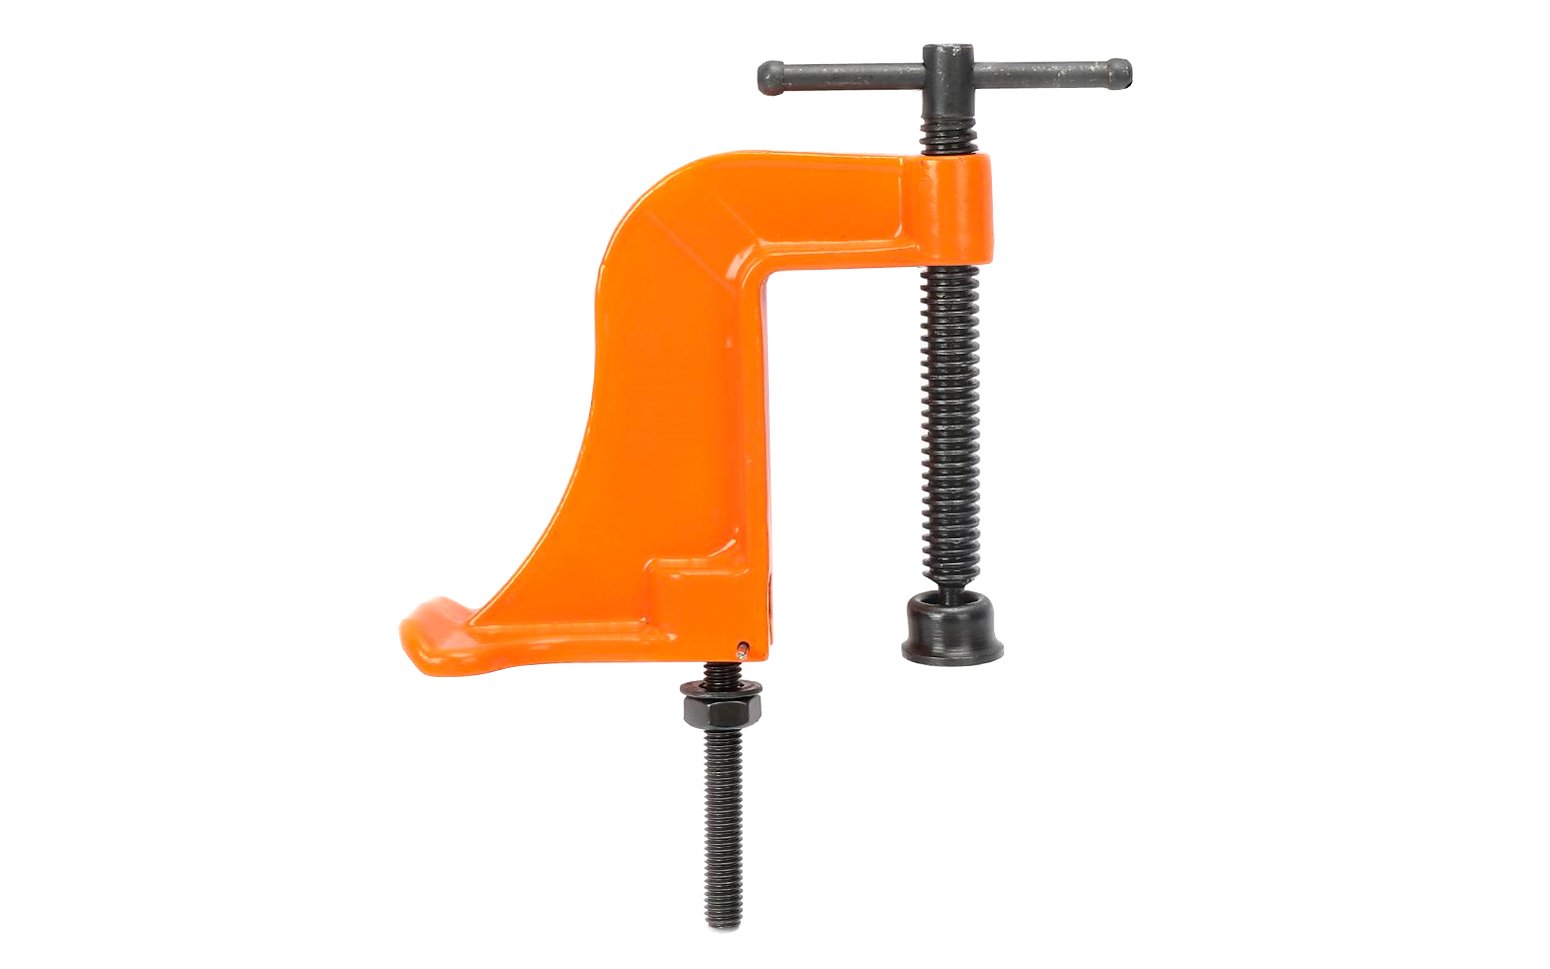 Pony Hold Down Clamp No. 1623 - Pony Tools / Jorgensen - Clamps & Holds on benchtops - 2000 lb. clamping force - offer the advantage of benchtop & machine-table “surface” clamping. They are designed to rotate a full 360° around the holding bolt & can be used on any wood or metal surface - 3" max opening ~ 044295162302